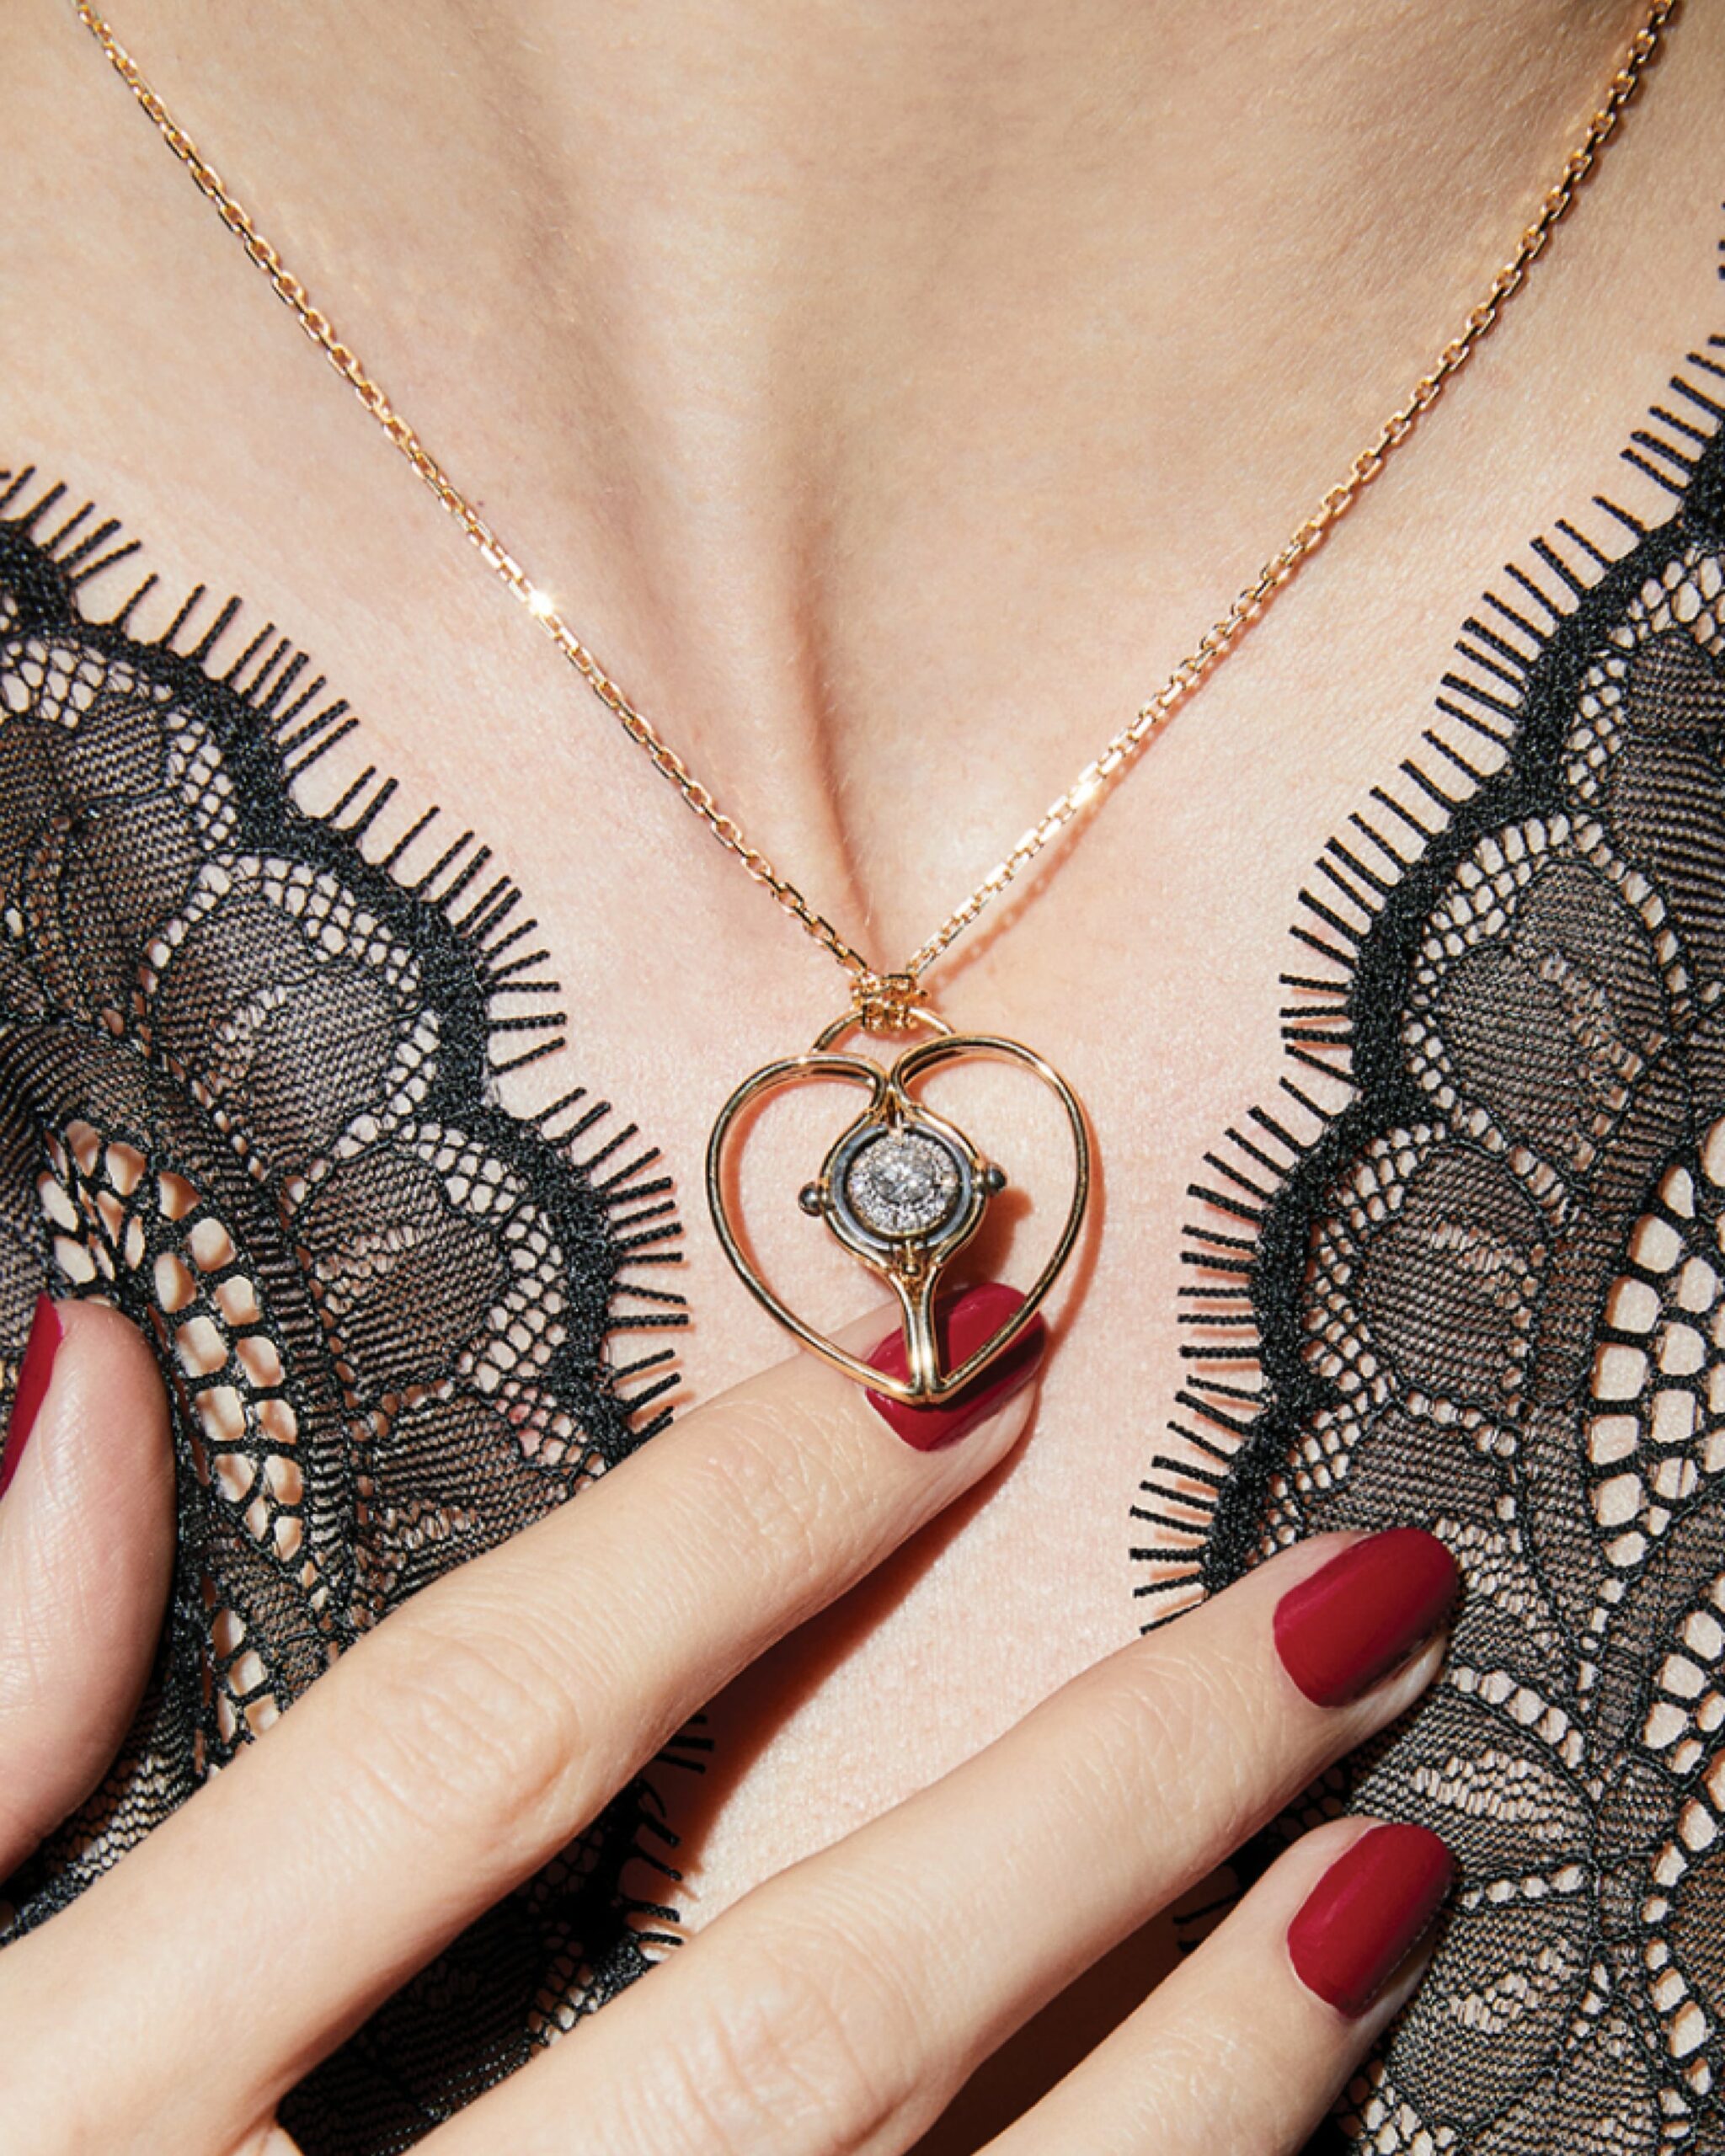 Mira Heart Charm necklace from Elie Top featuring a central diamond and gold heart necklace design